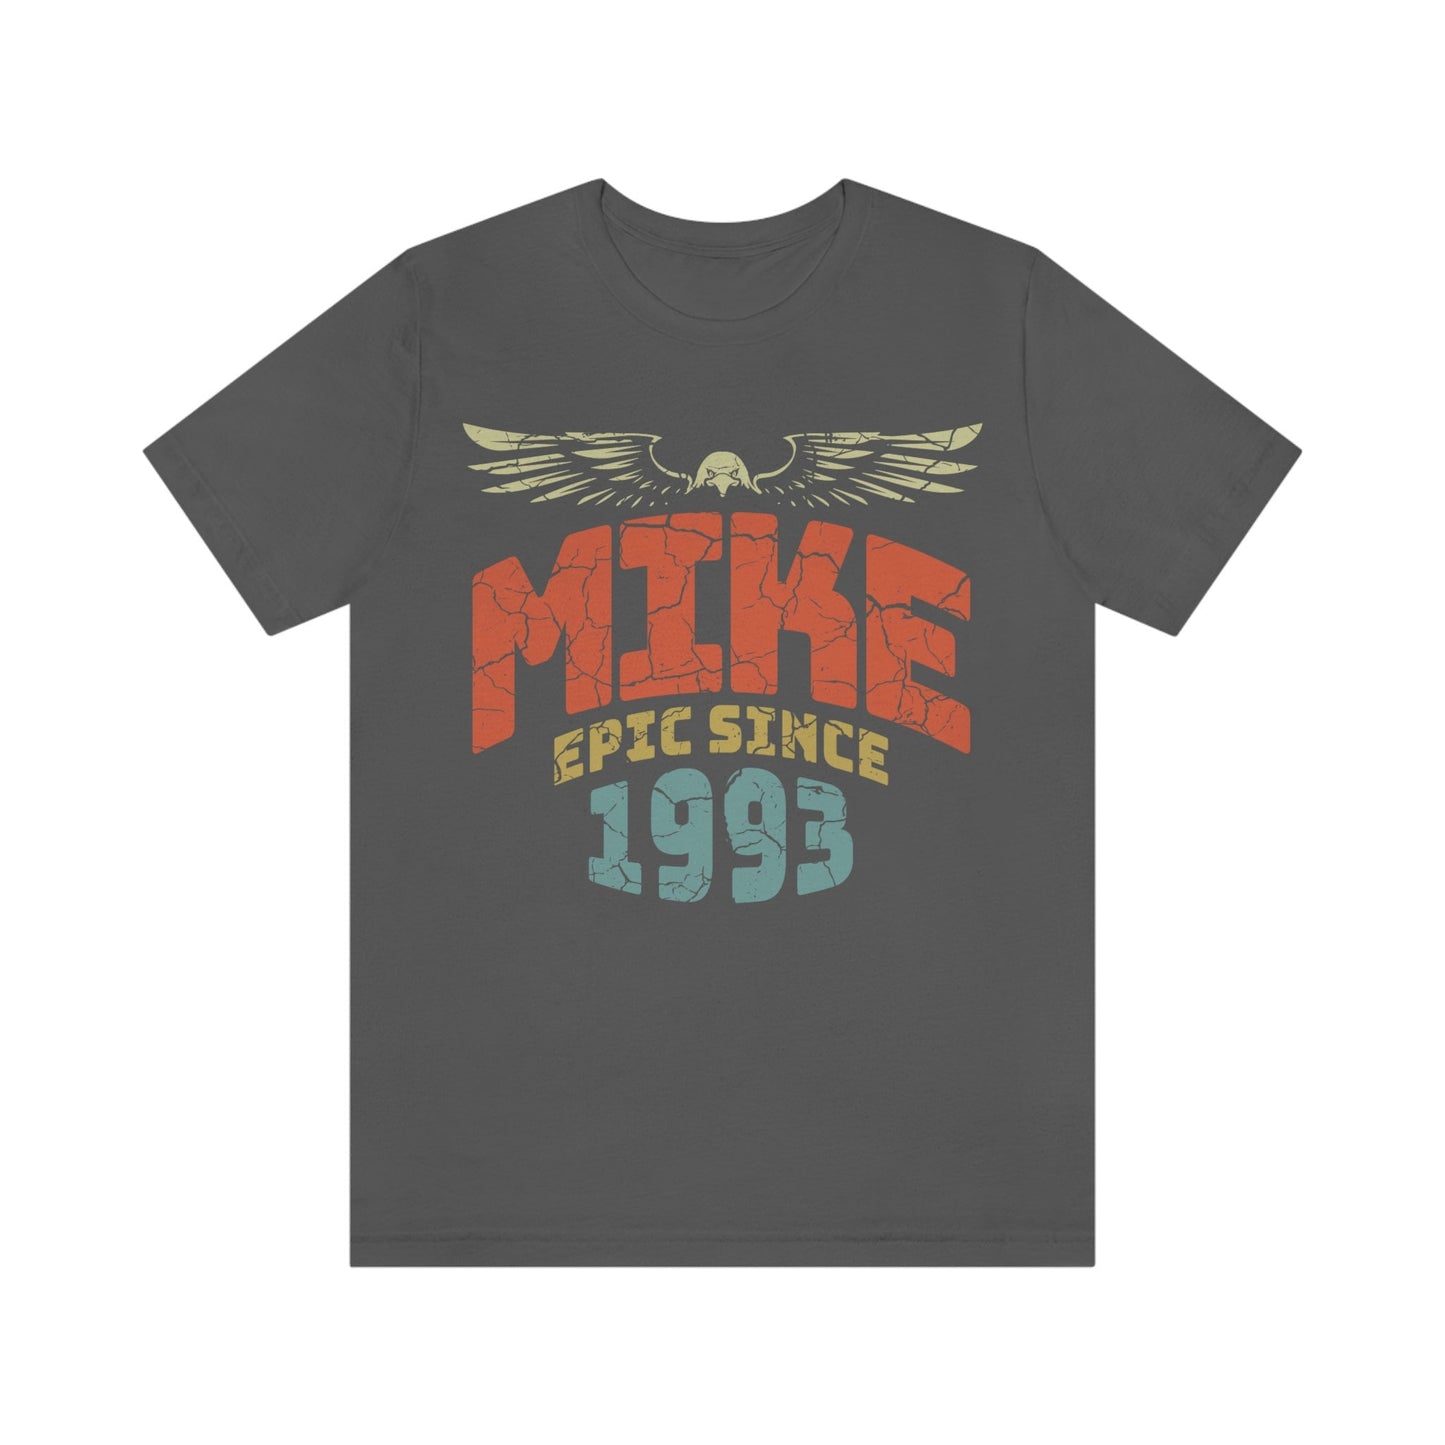 Personalized Name Epic Since 1993 Retro T-Shirt, Birthday Shirt, Gift For Him